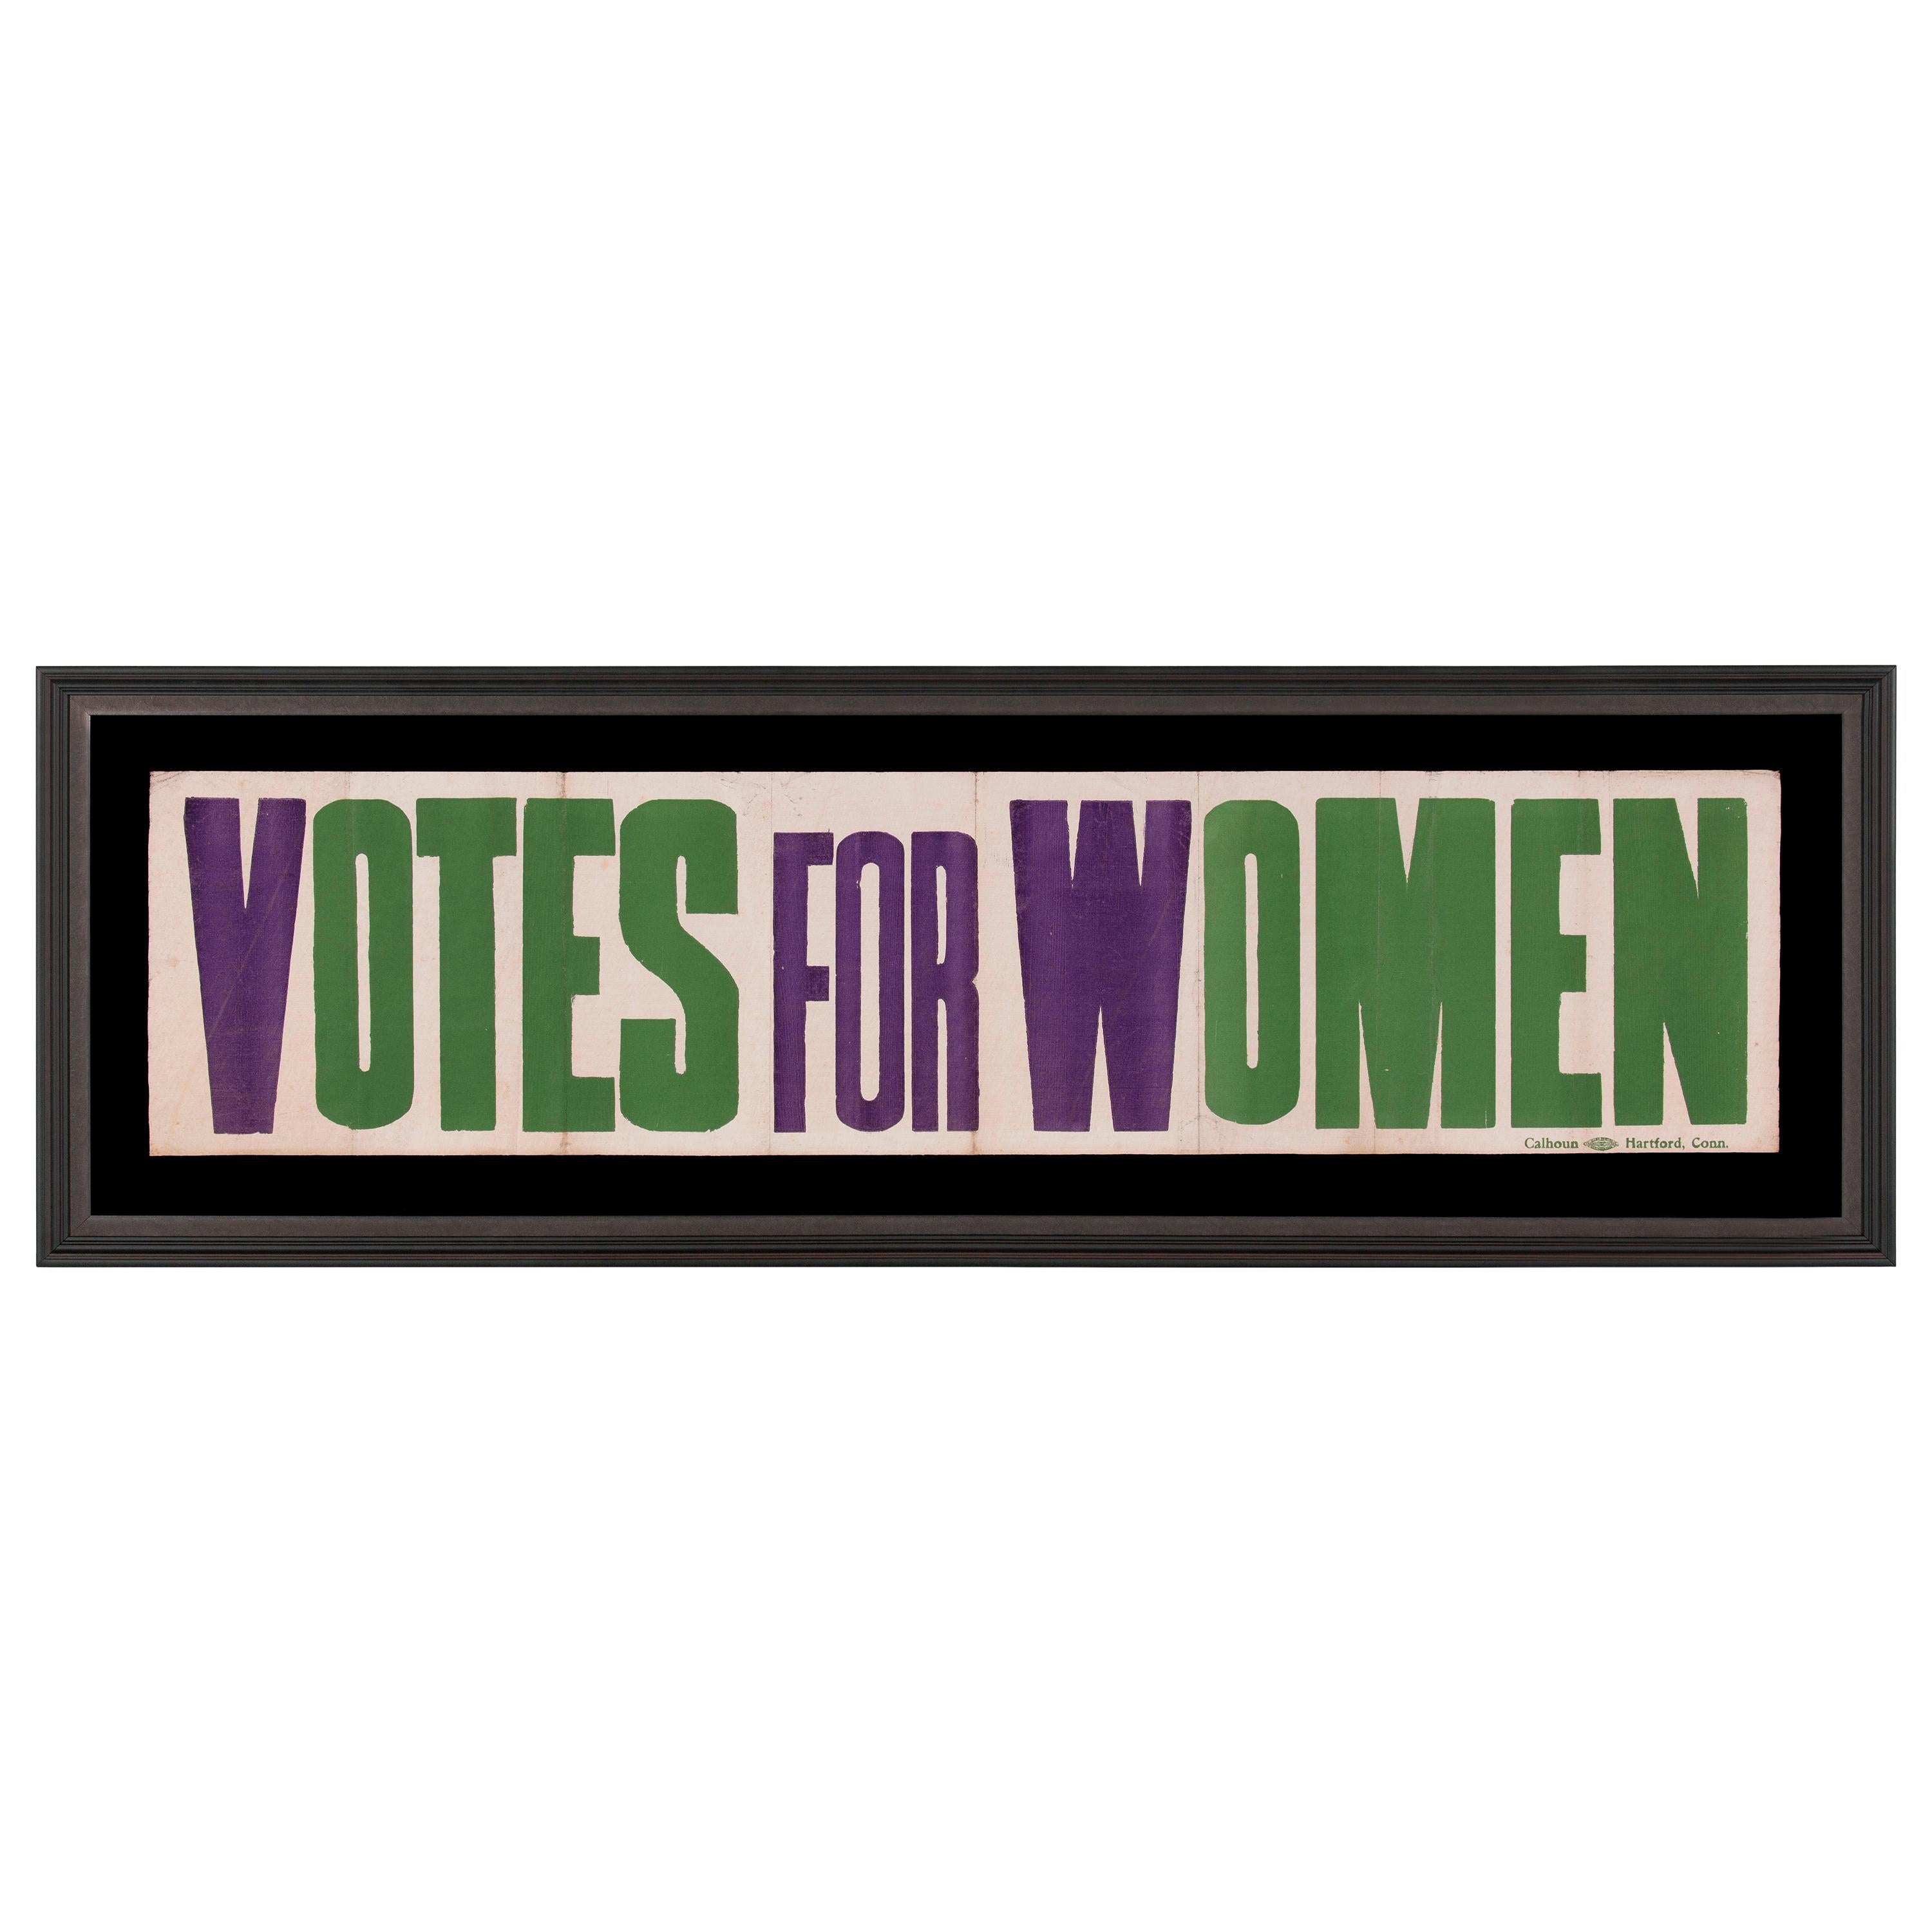 EXCEPTIONAL, LARGE, VOTES FOR WOMEN BANNER IN VIOLET AND GREEN, MADE IN HARTFORD, CONNECTICUT, PROBABLY COMMISSIONED BY HARRIOT EATON STANTON BLATCH'S 